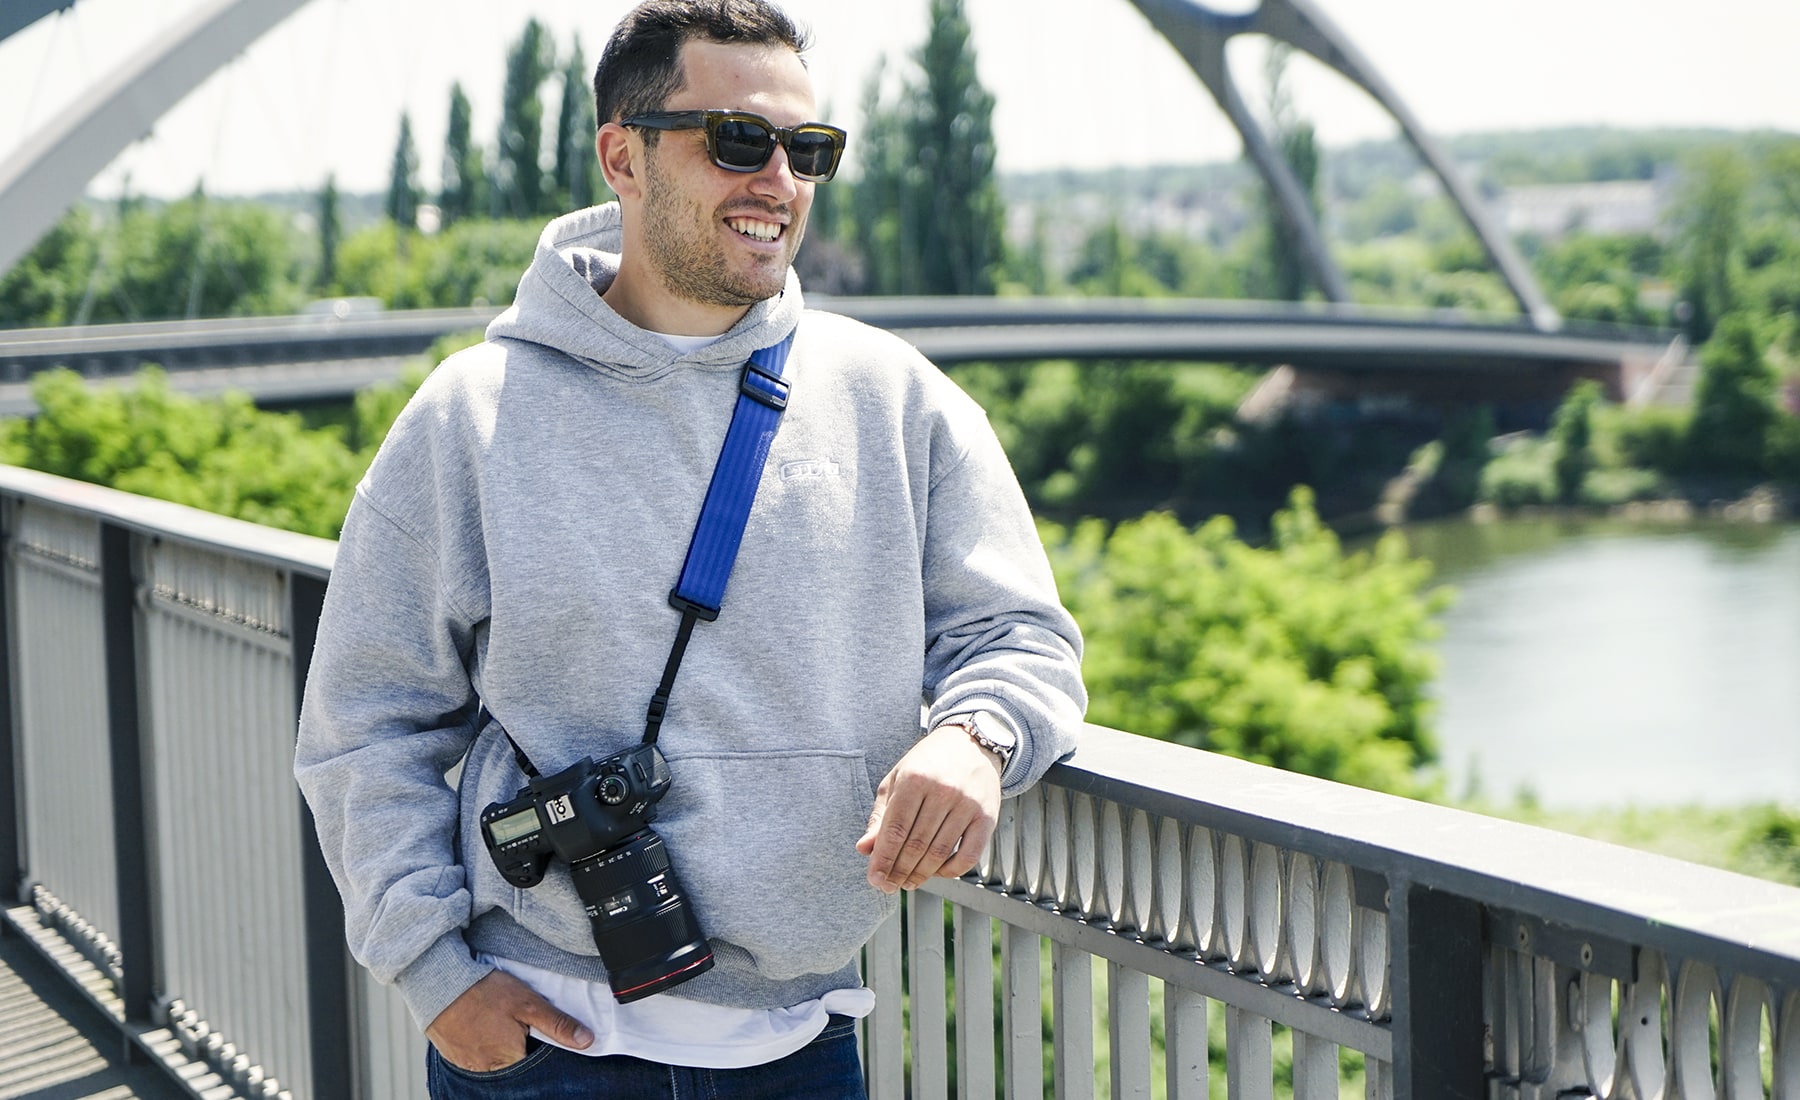 SPINN adjustable camera strap - the best camera strap available